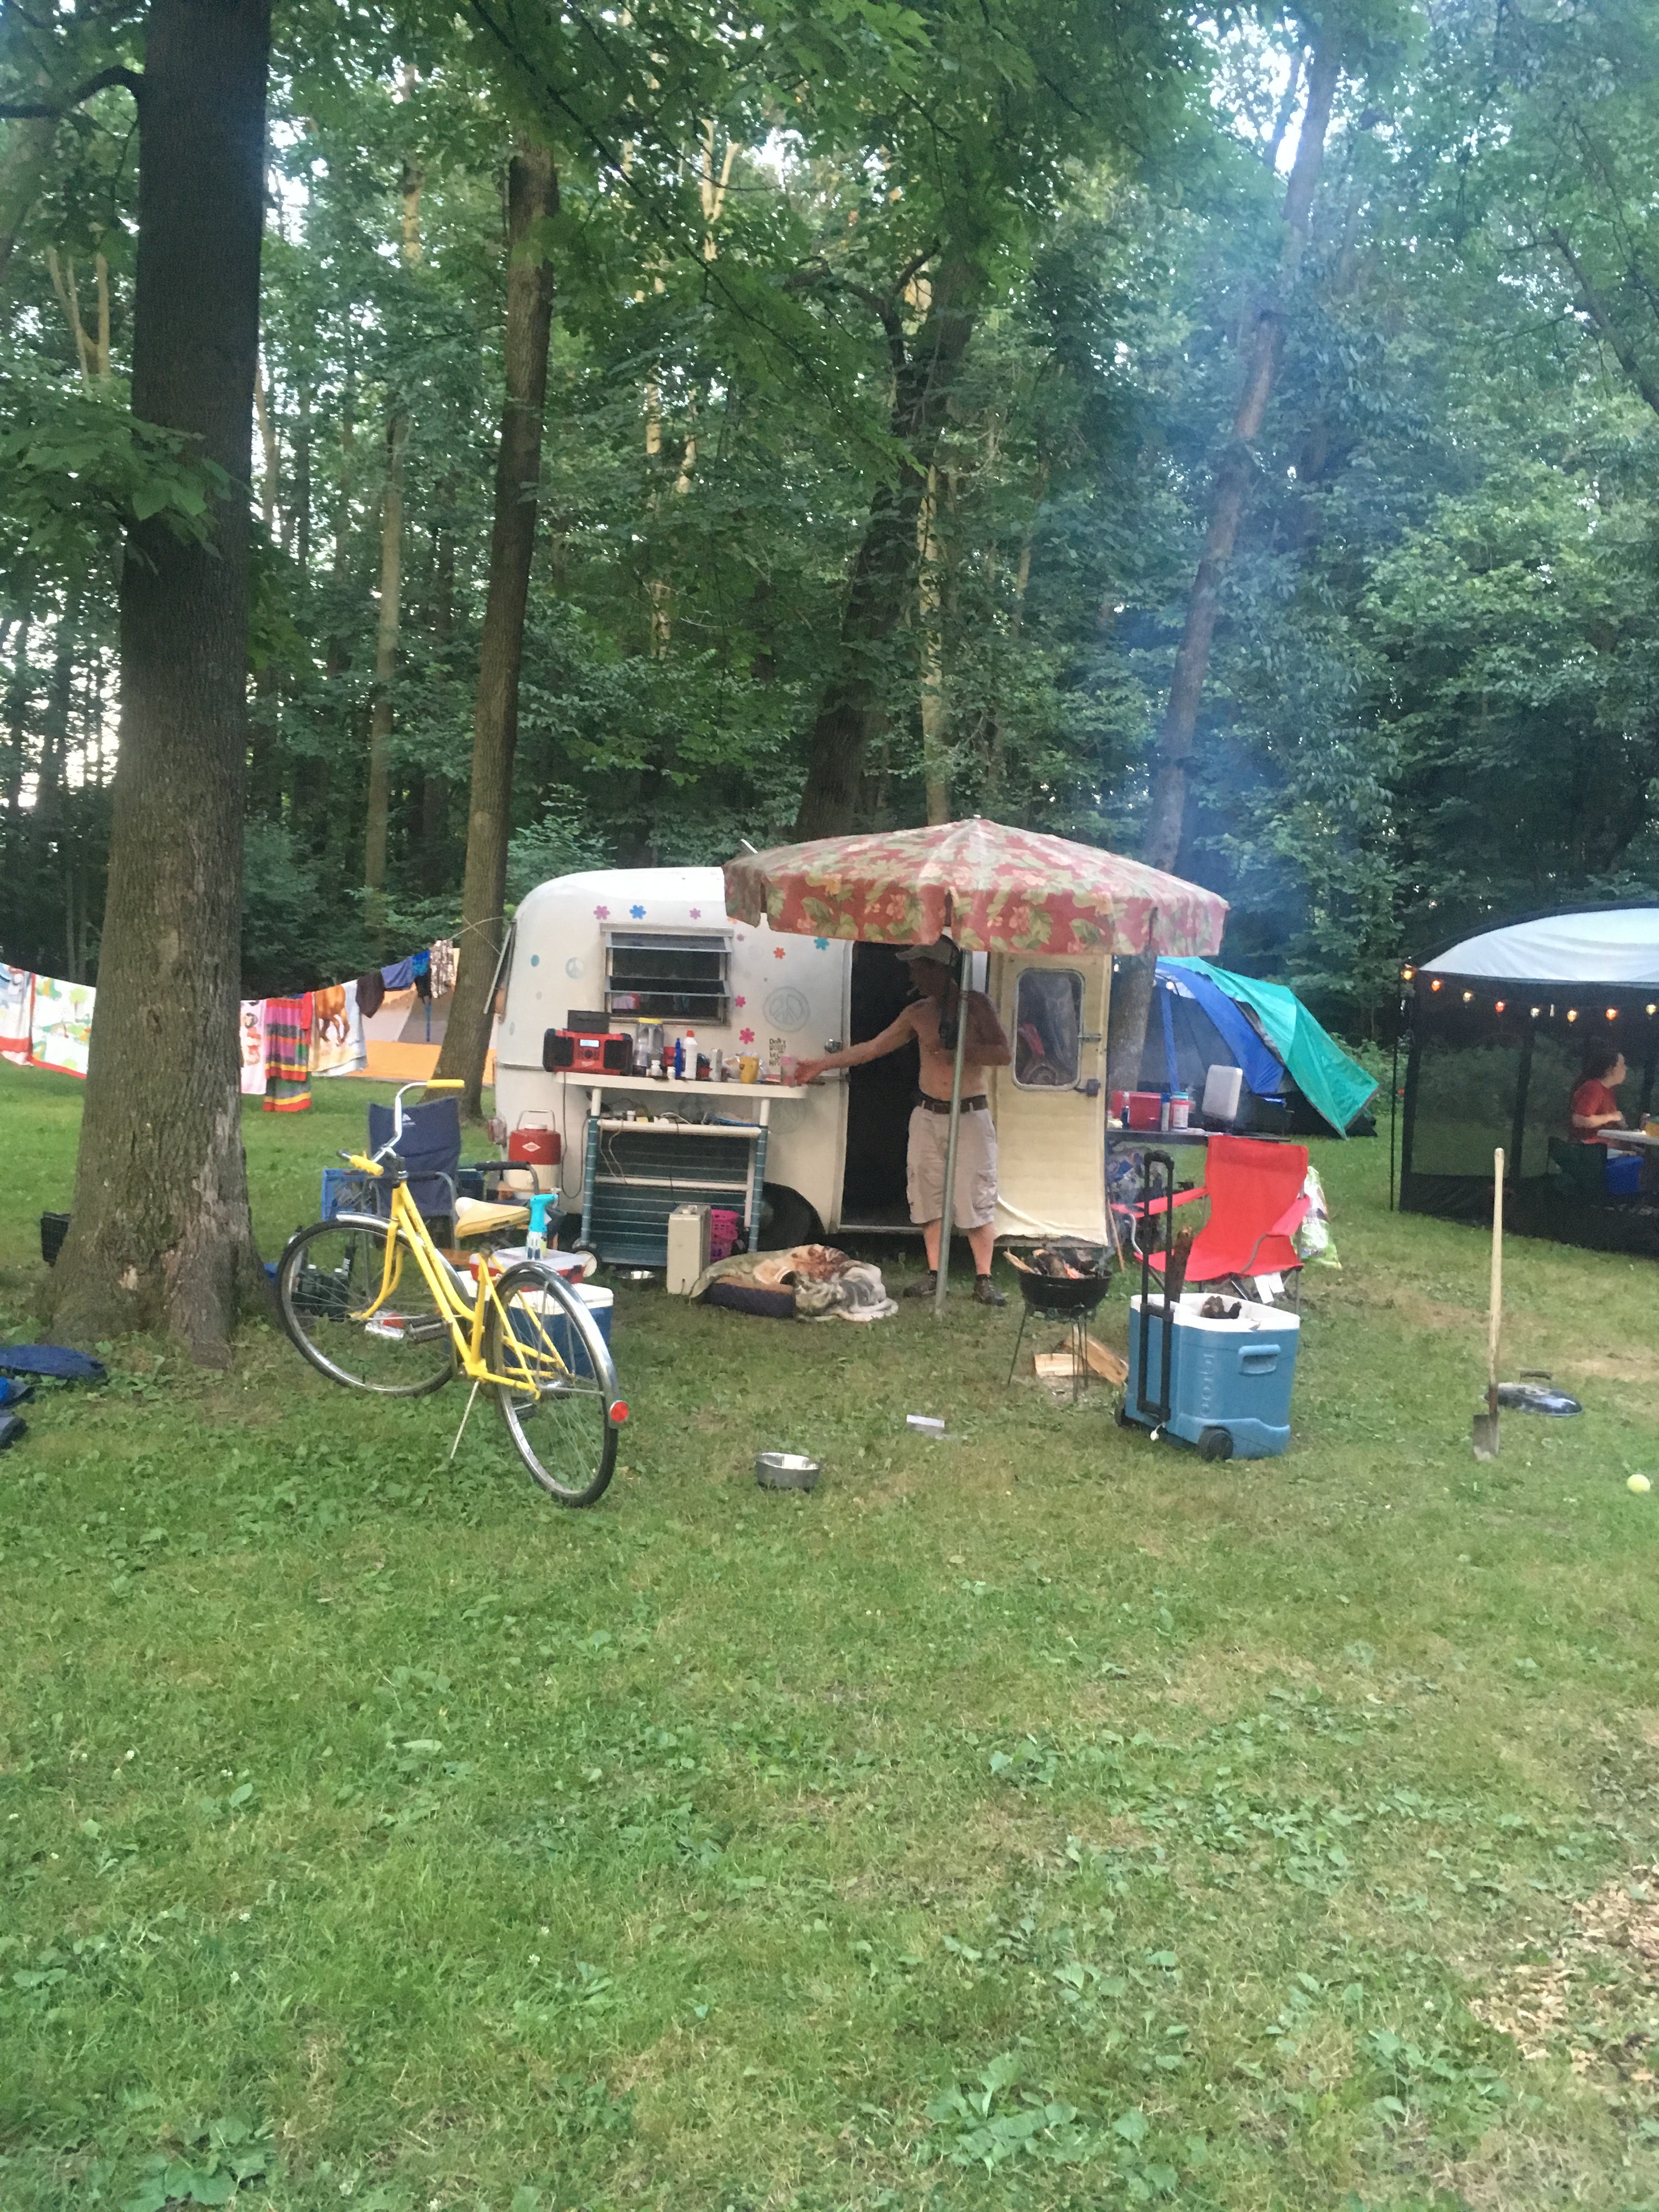 Camper submitted image from Fon du Lac County Waupun Park - 2